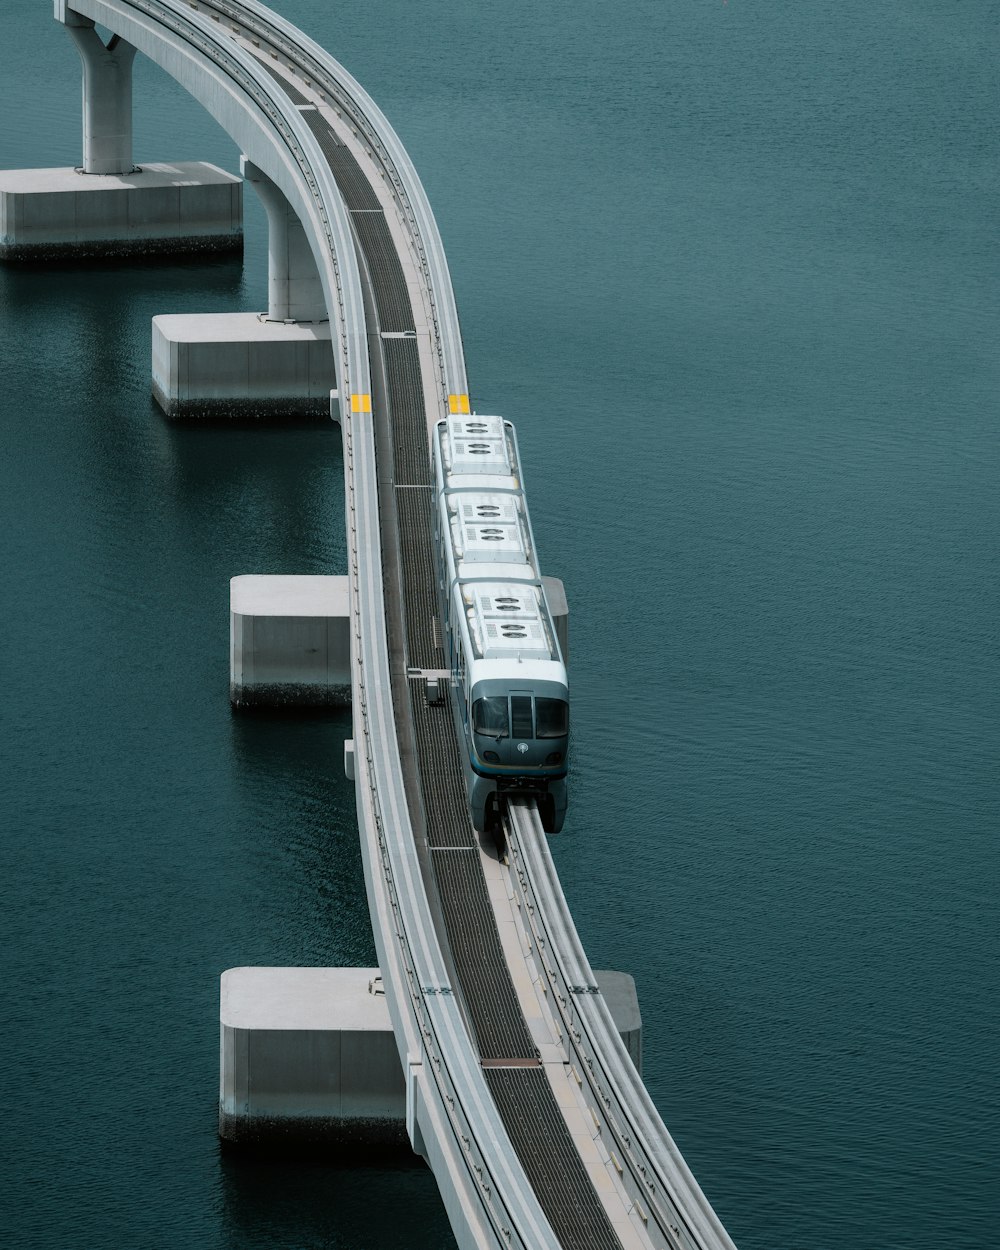 a train on a bridge over a body of water